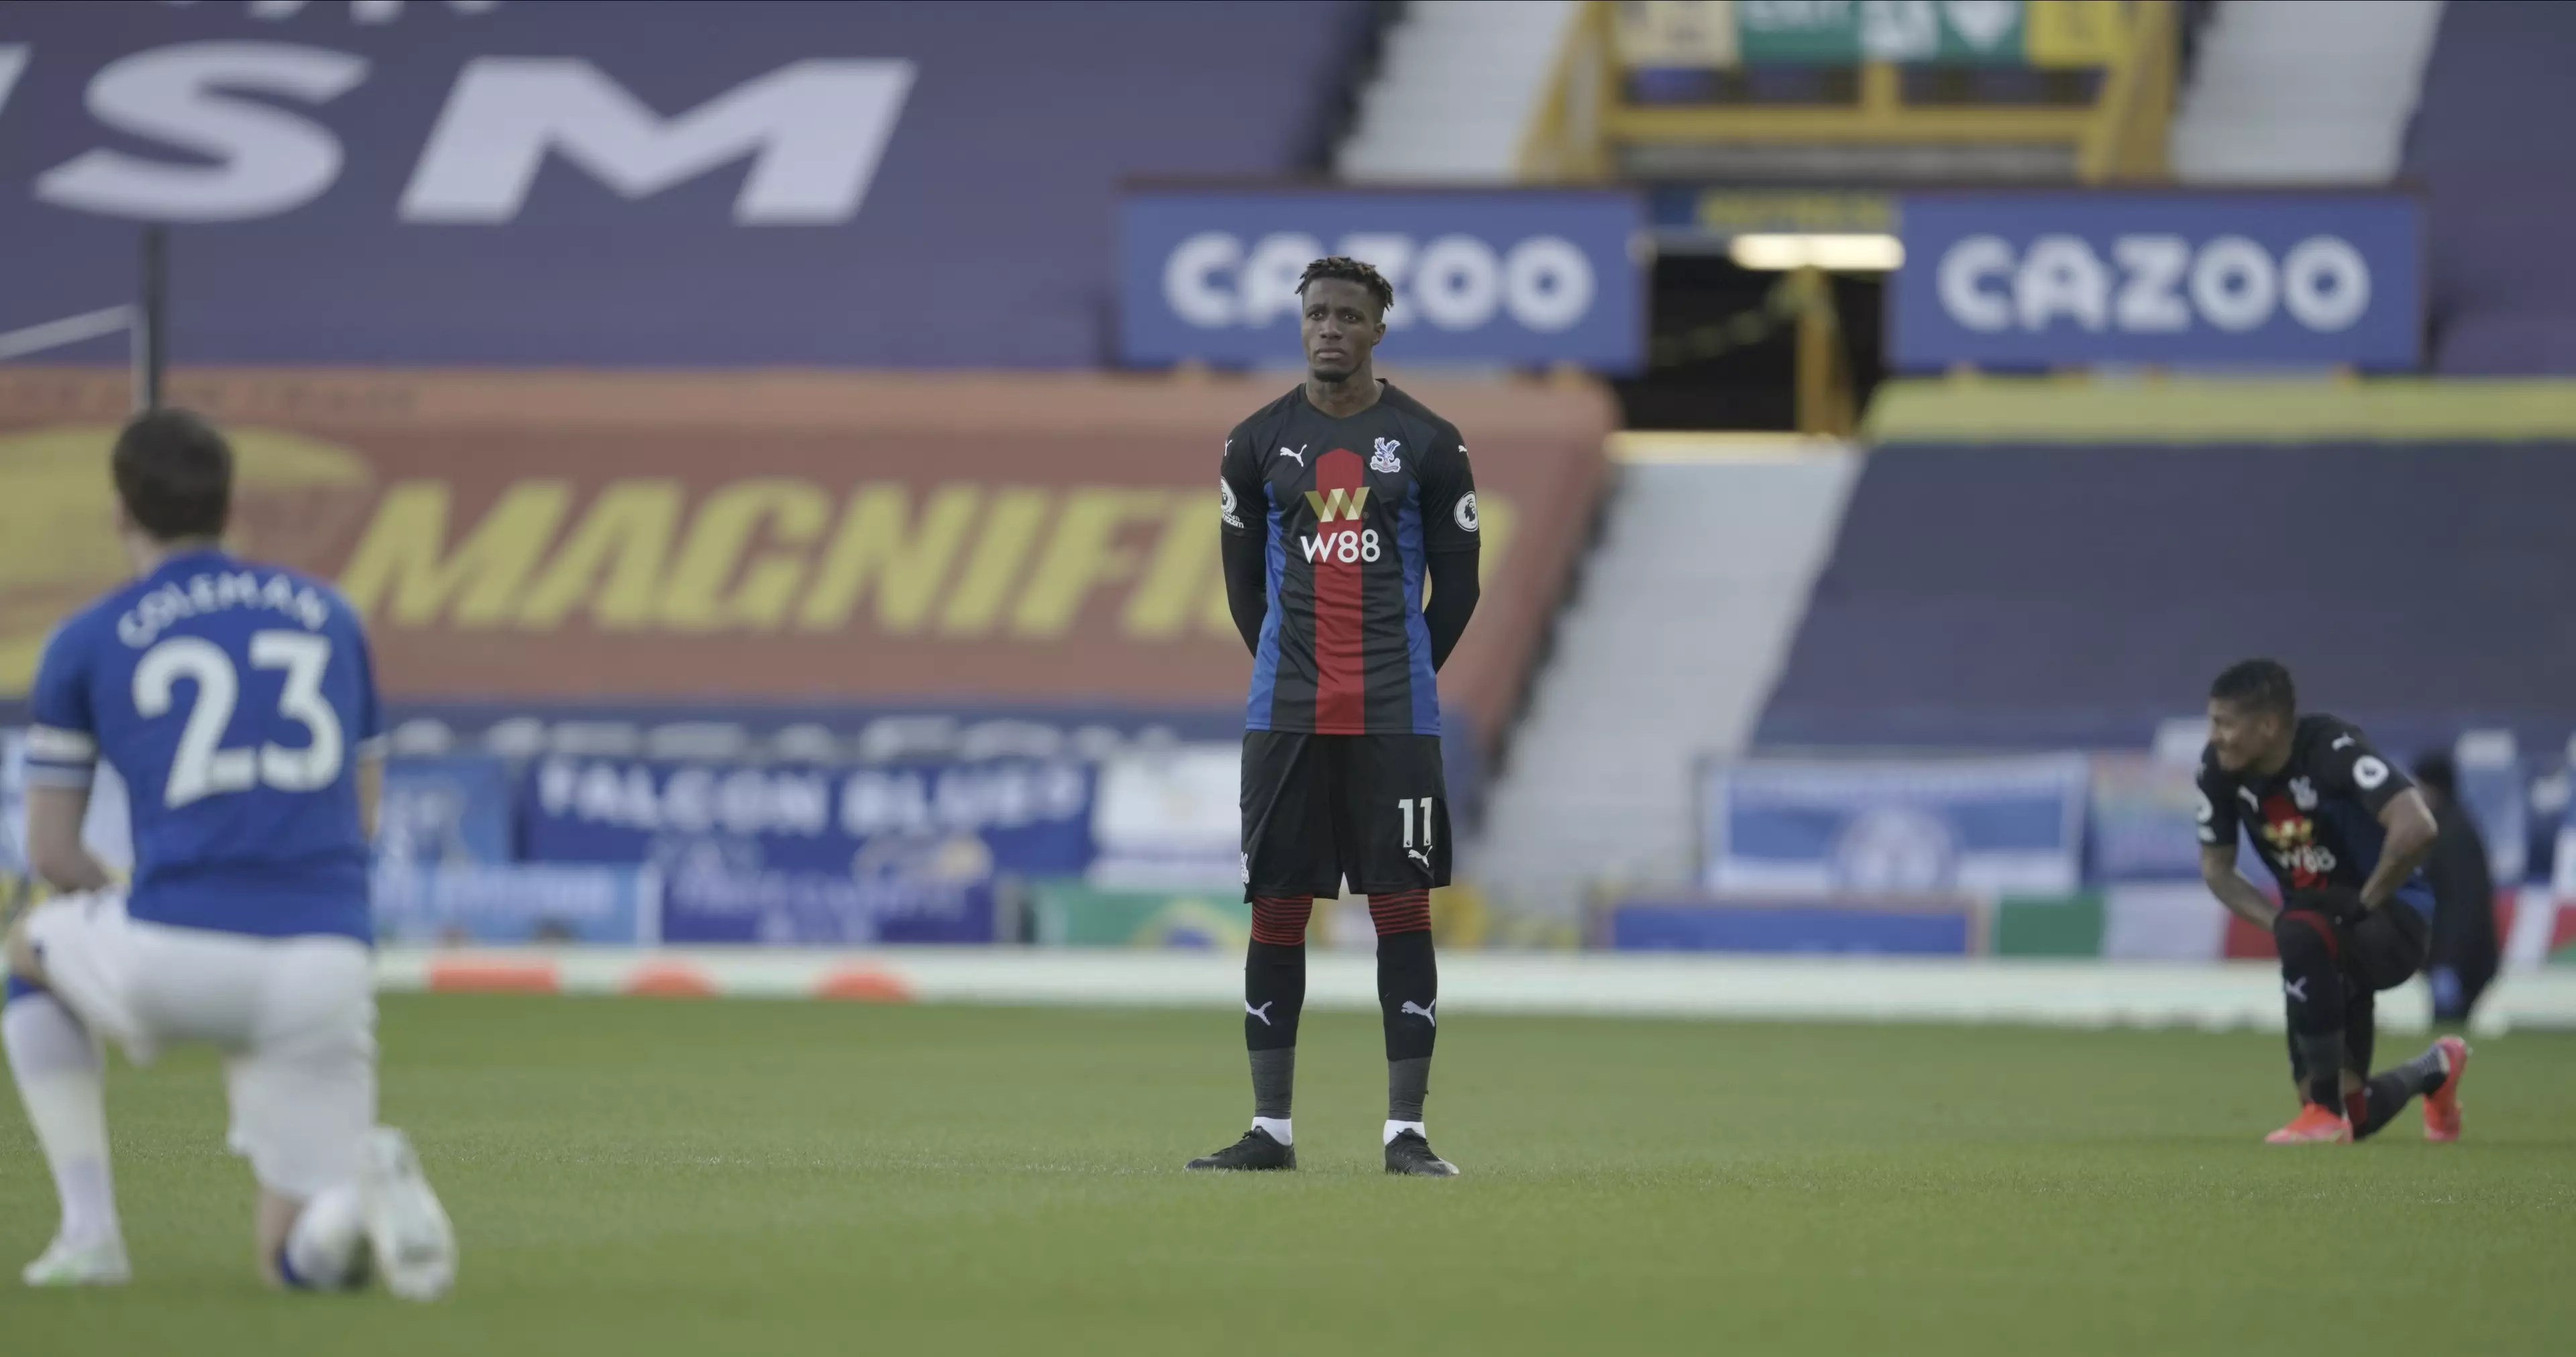 Wilfried Zaha has decided to no longer take the knee. Image: PA Images